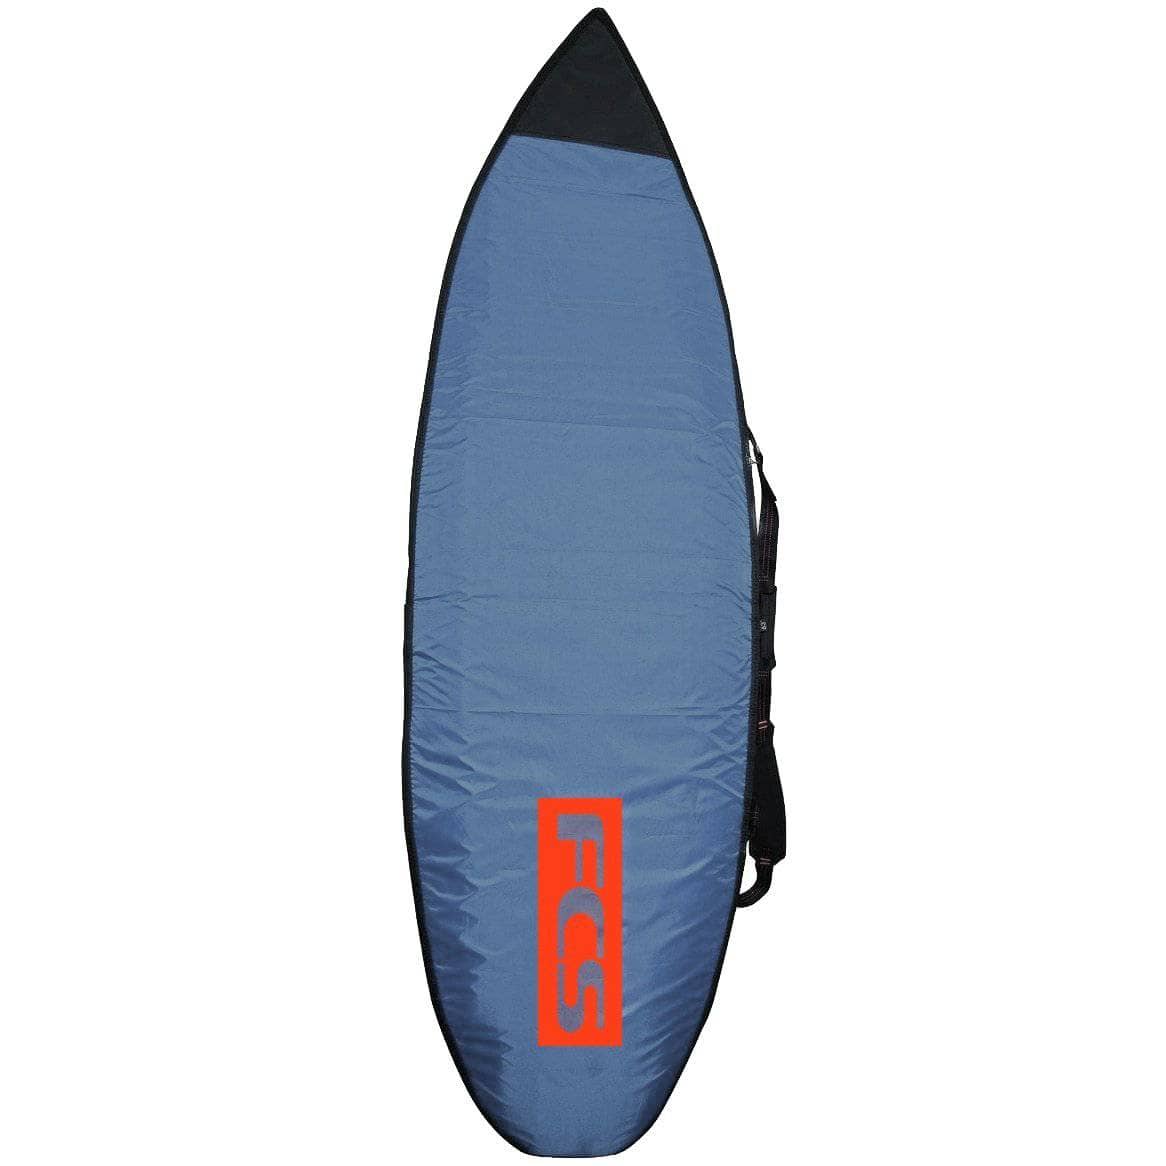 FCS 67 Classic All Purpose Surfboard Cover Bag - Steel Blue/White Surfboard Day Runner Bag/Cover by FCS 6ft 7in